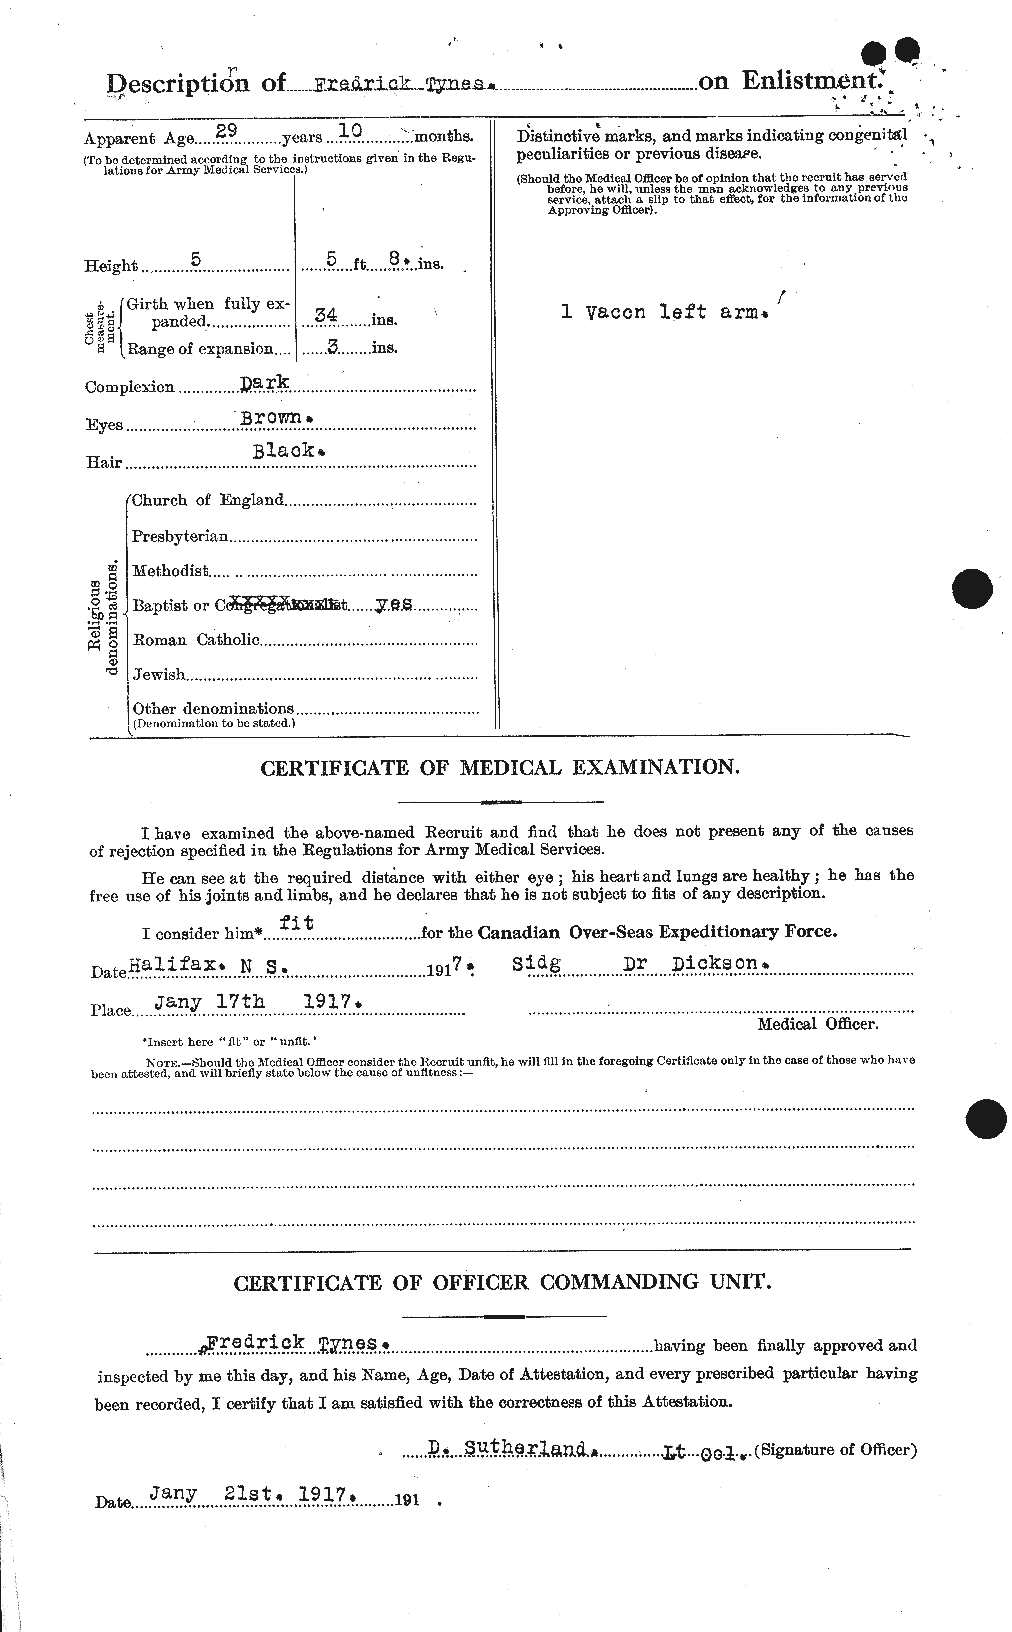 Personnel Records of the First World War - CEF 644537b